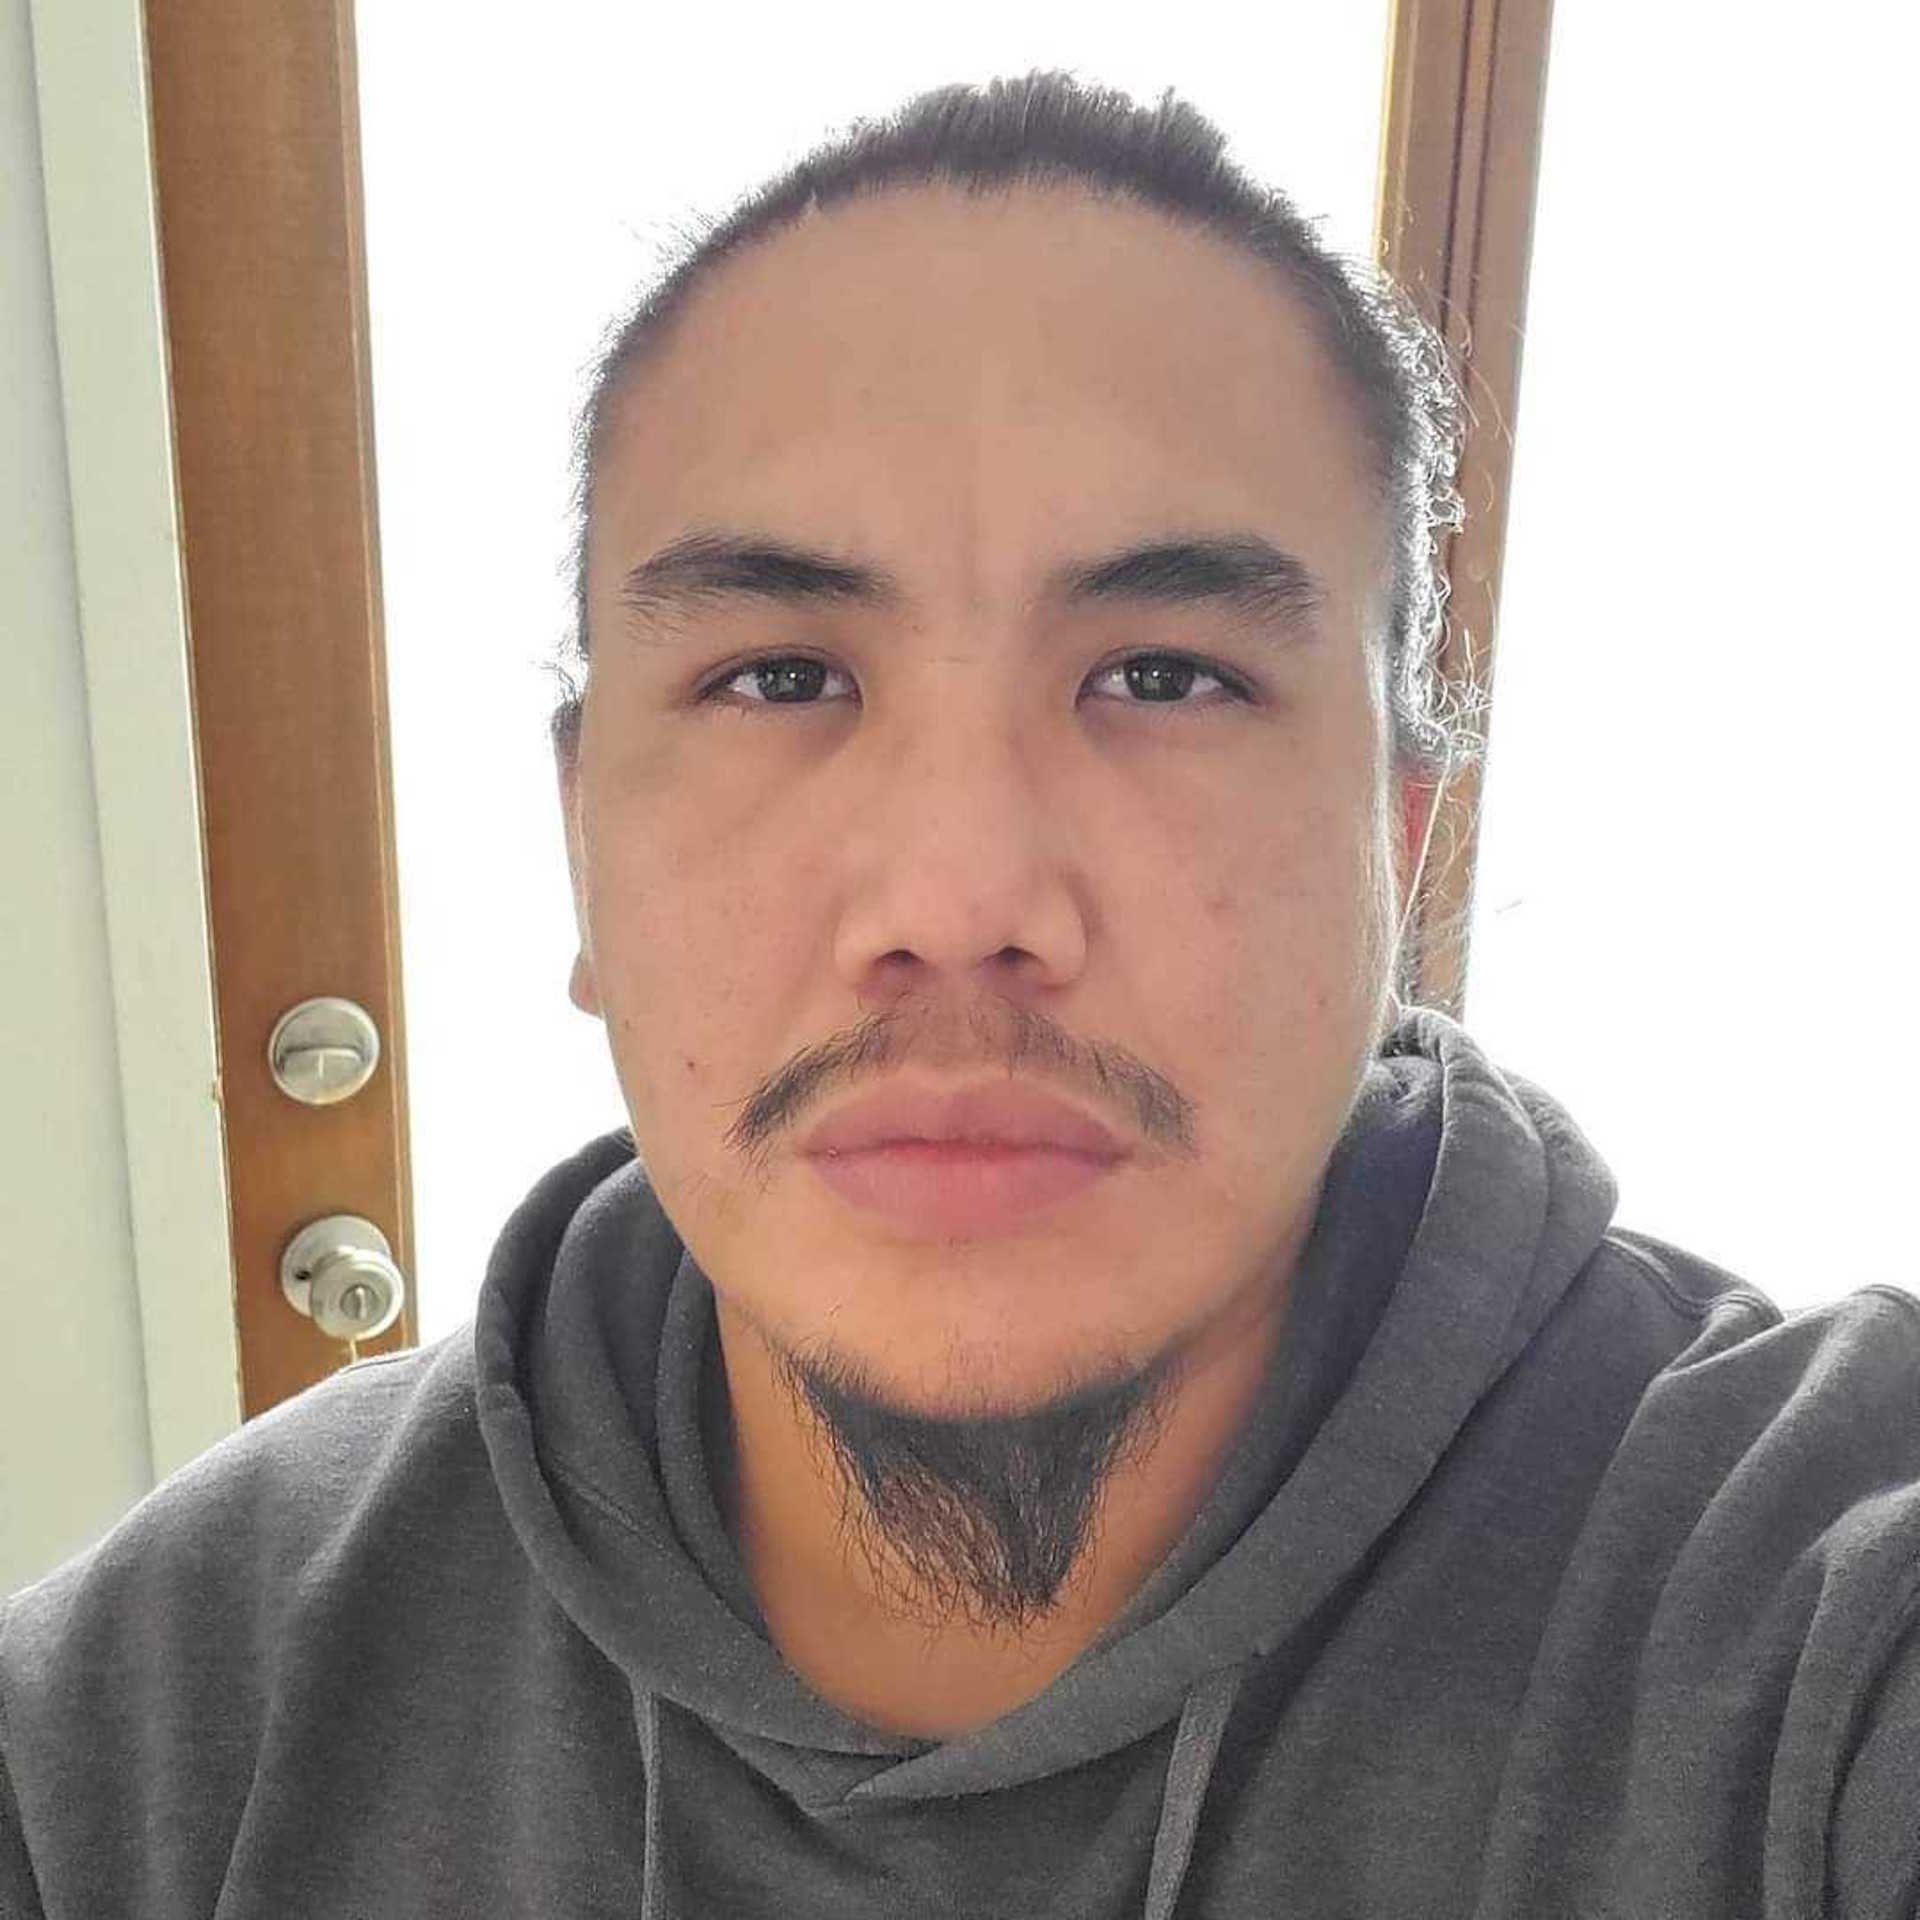 Samuel Johns founded the Forget Me Not movement to reconnect Alaska’s homeless individuals with their friends, family and culture.